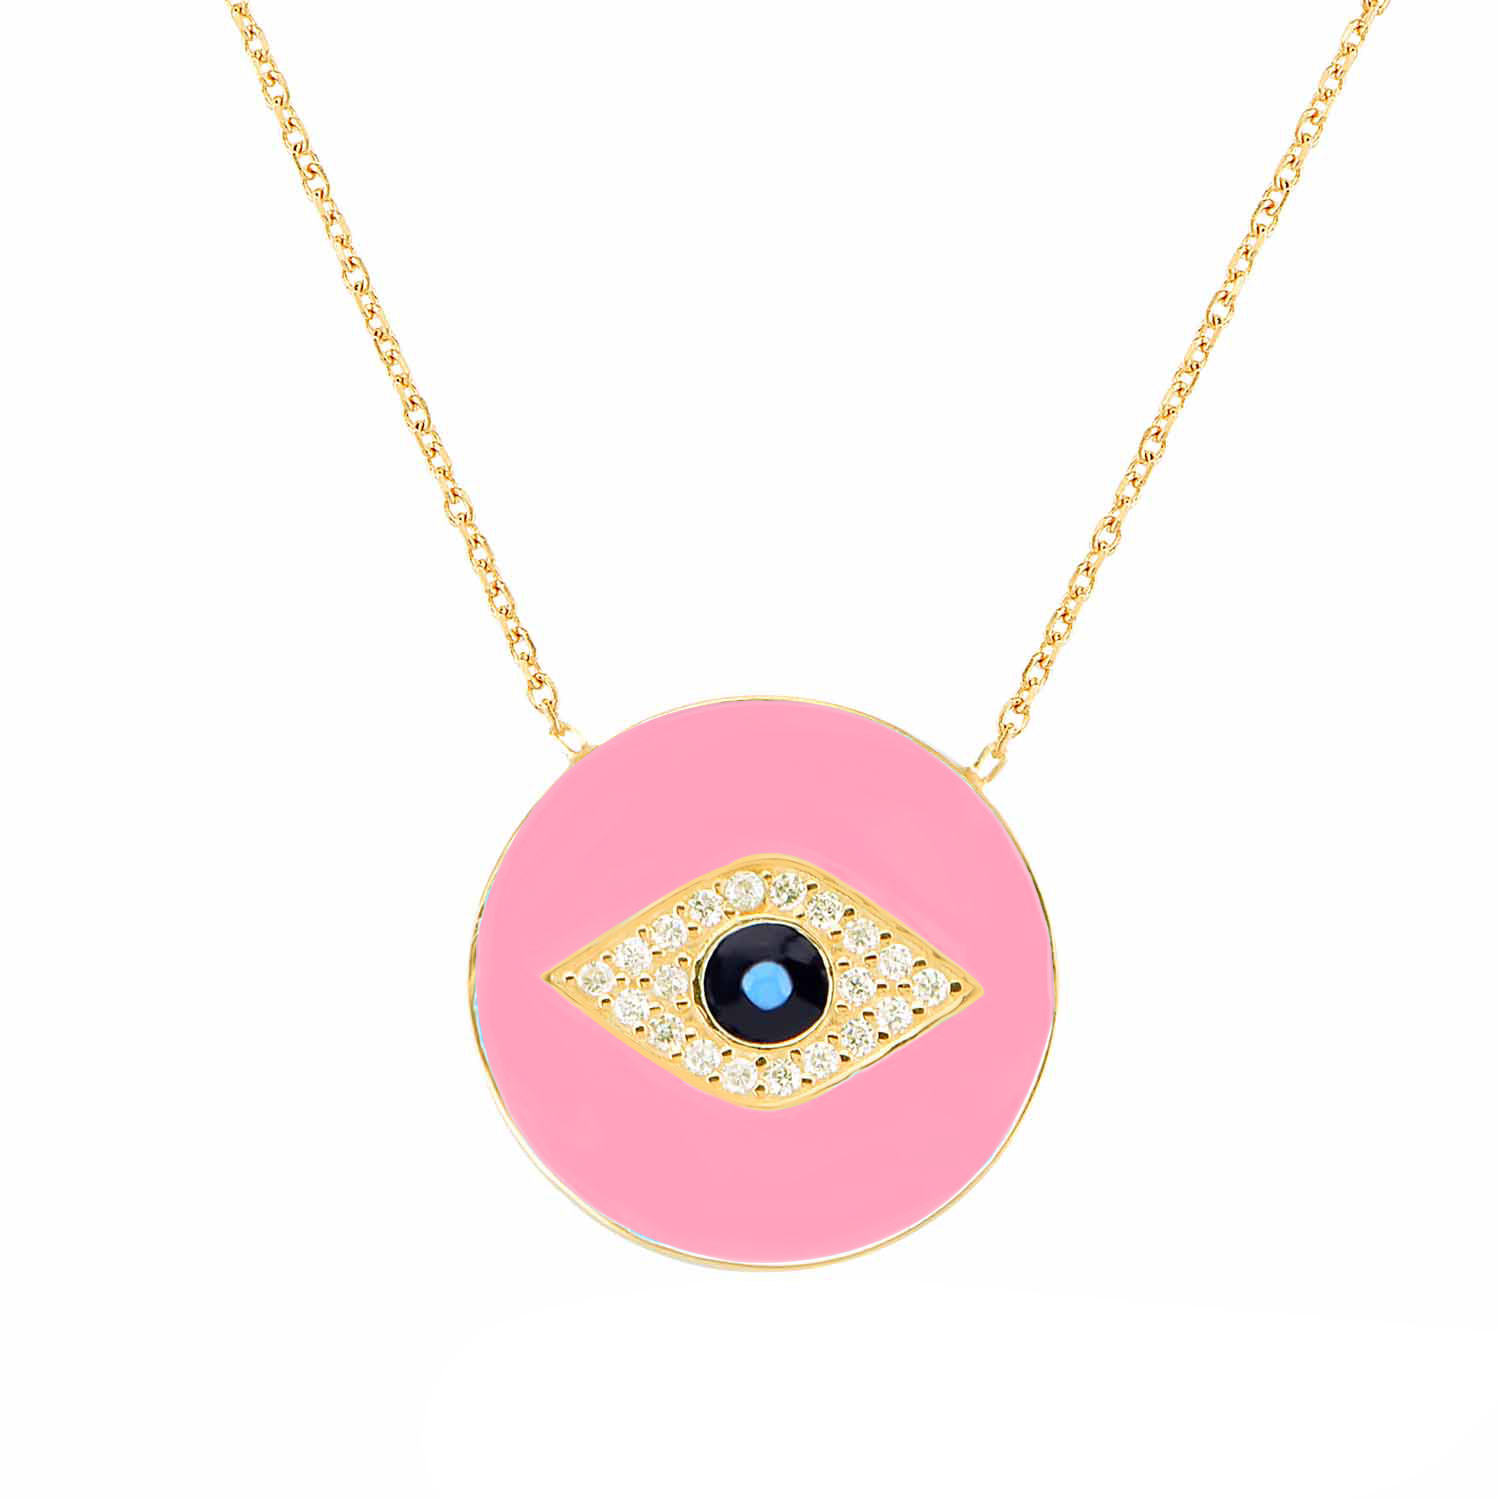 925-sterling-silver-eye-necklace-with-cubic-zirkon-and-enamel